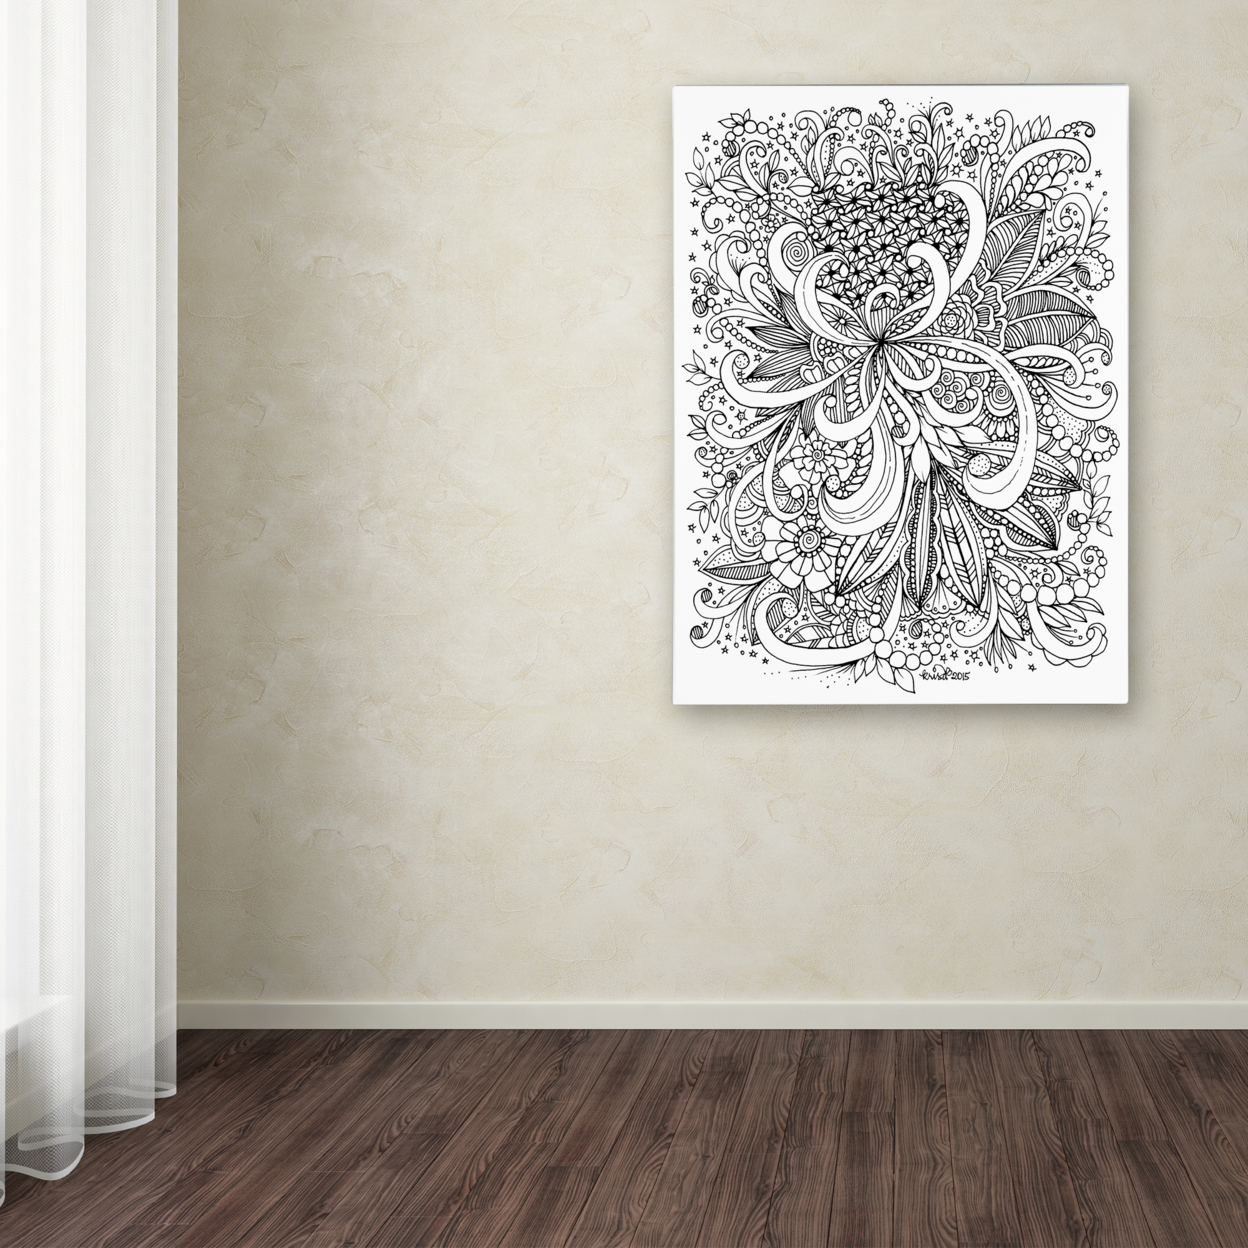 KCDoodleArt 'Zendoodle 3' Canvas Wall Art 35 X 47 Inches